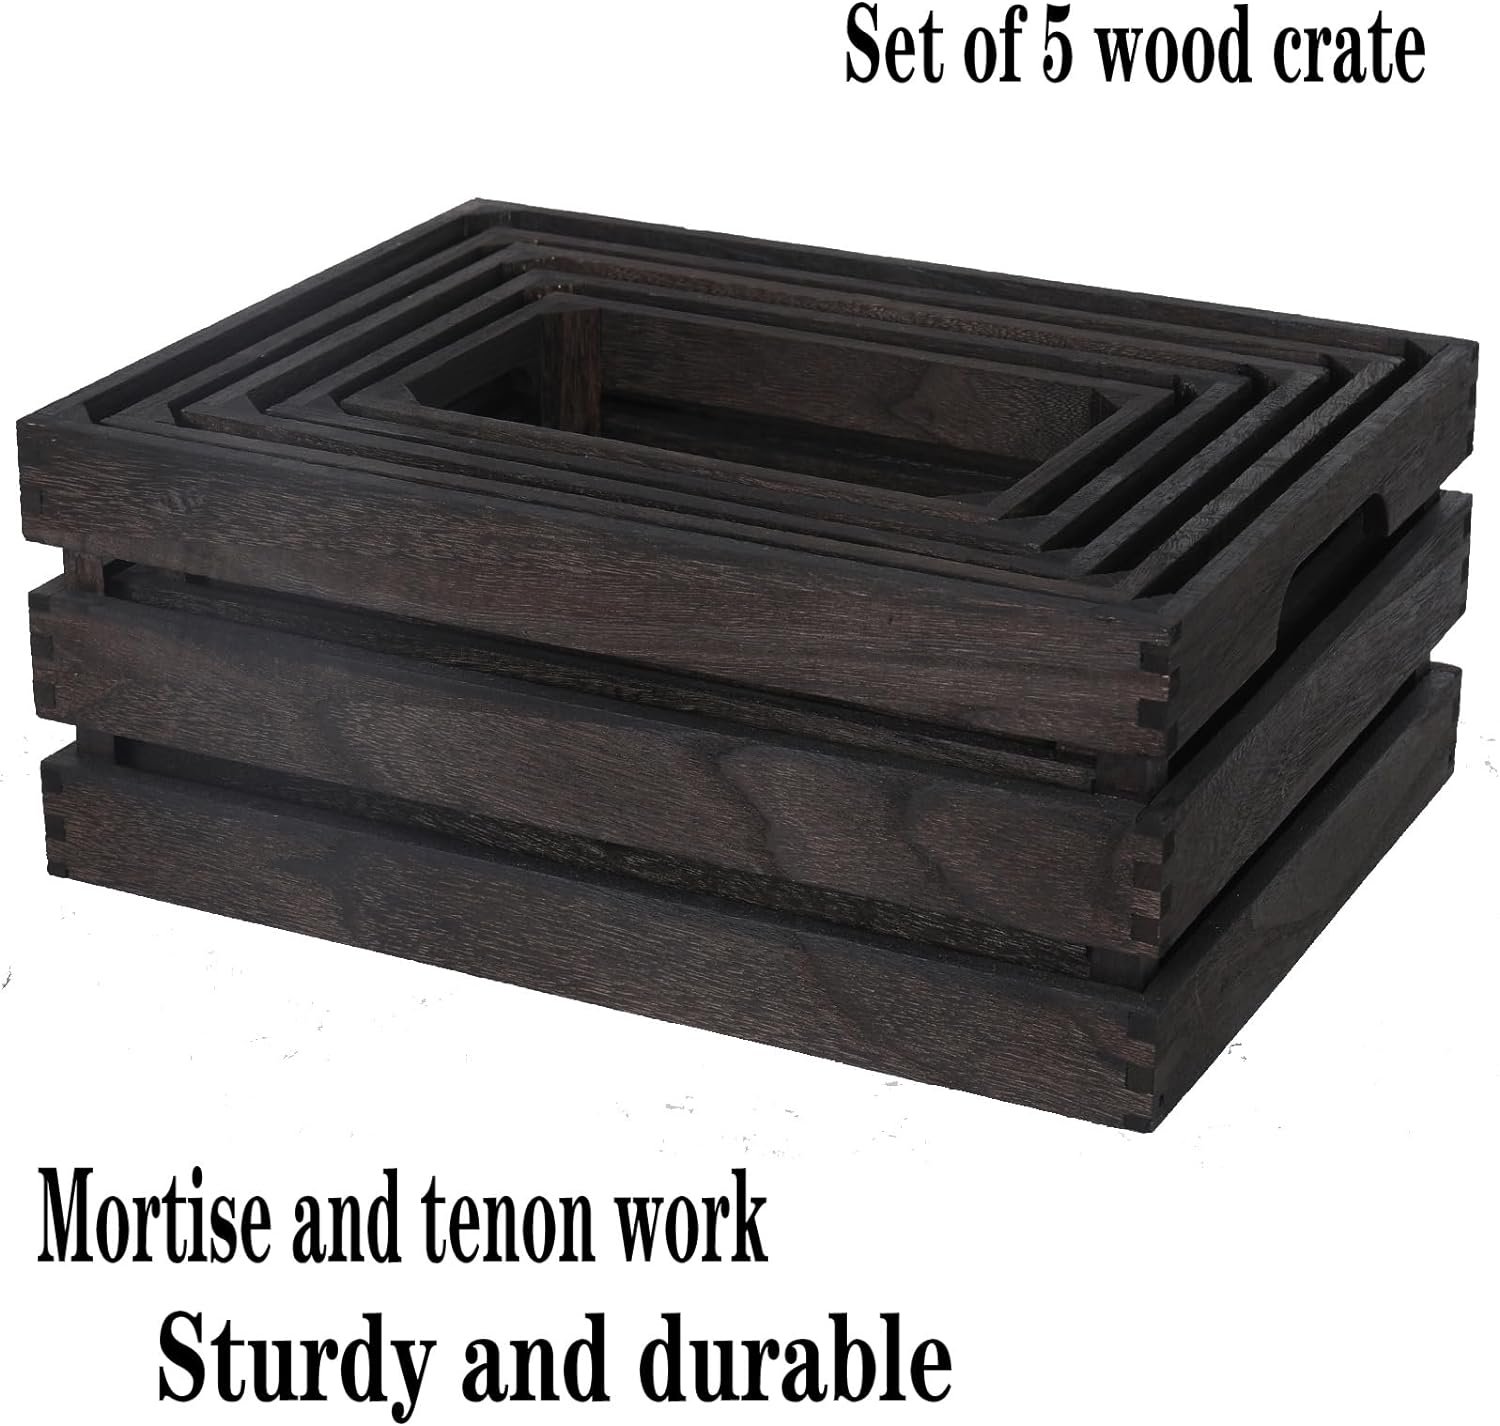 Set of 5 Nesting Wooden Crates Review